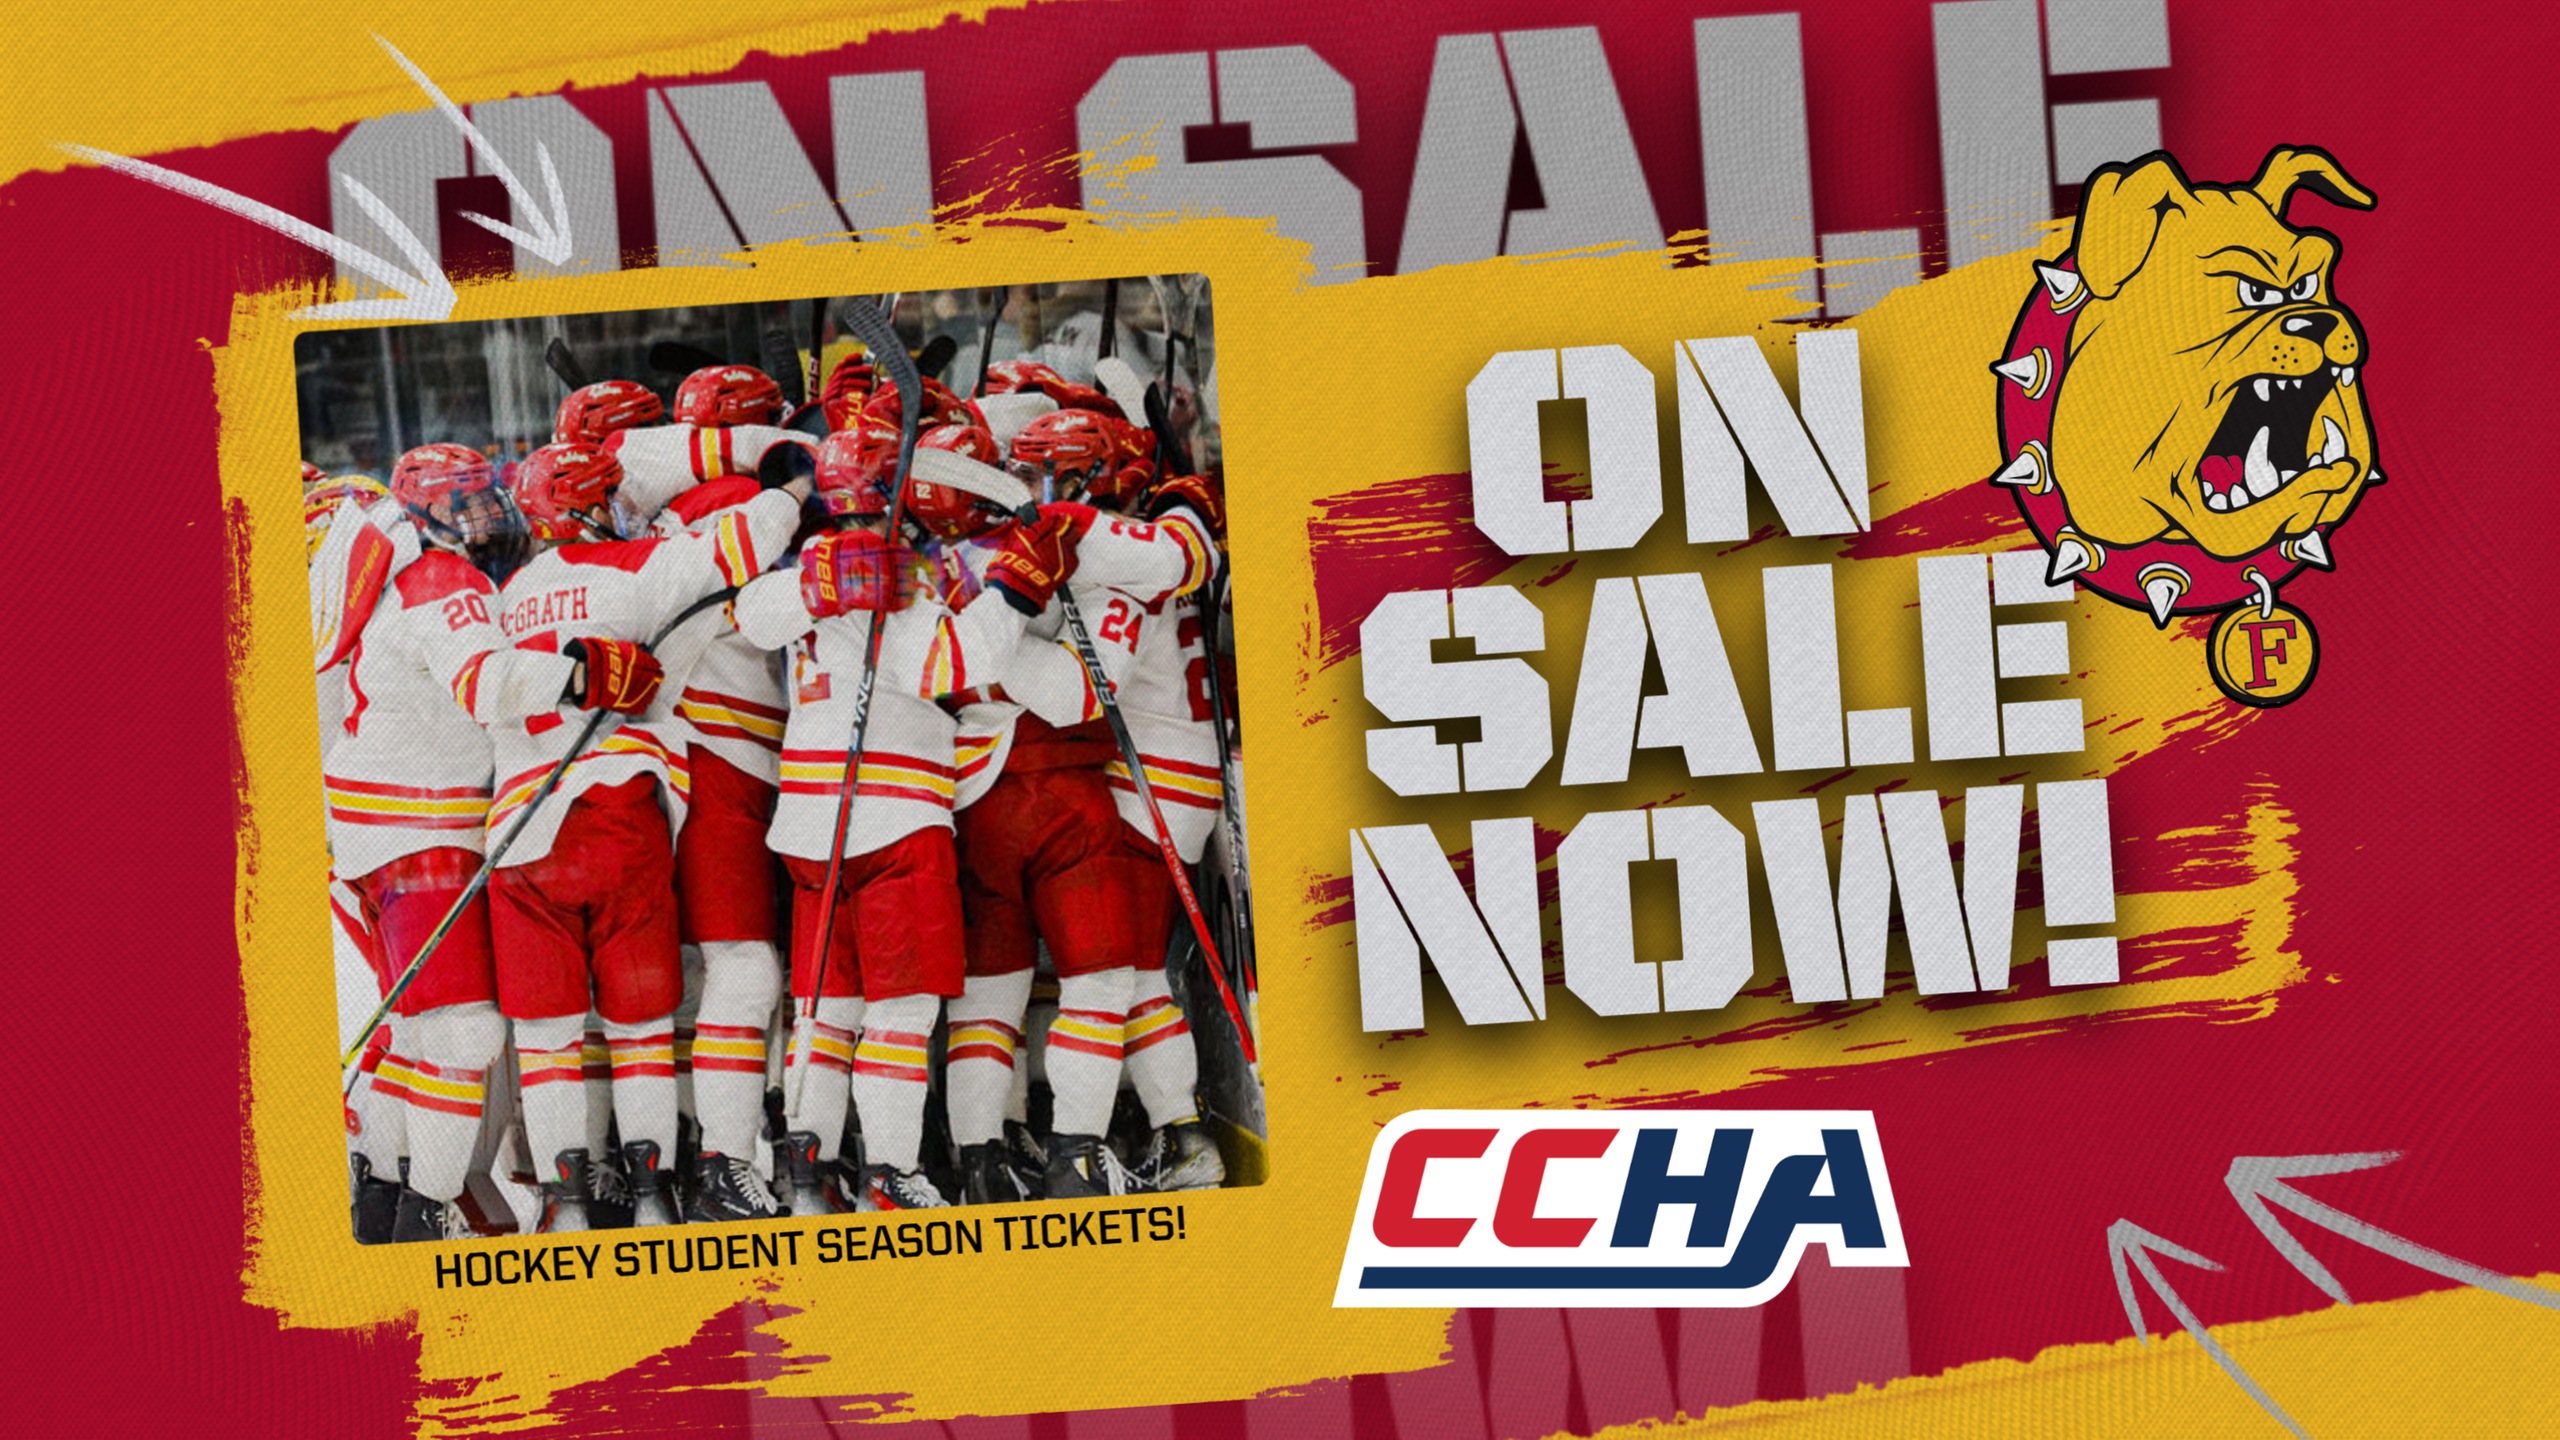 Ferris State Hockey Student Season Tickets Officially On Sale Now!